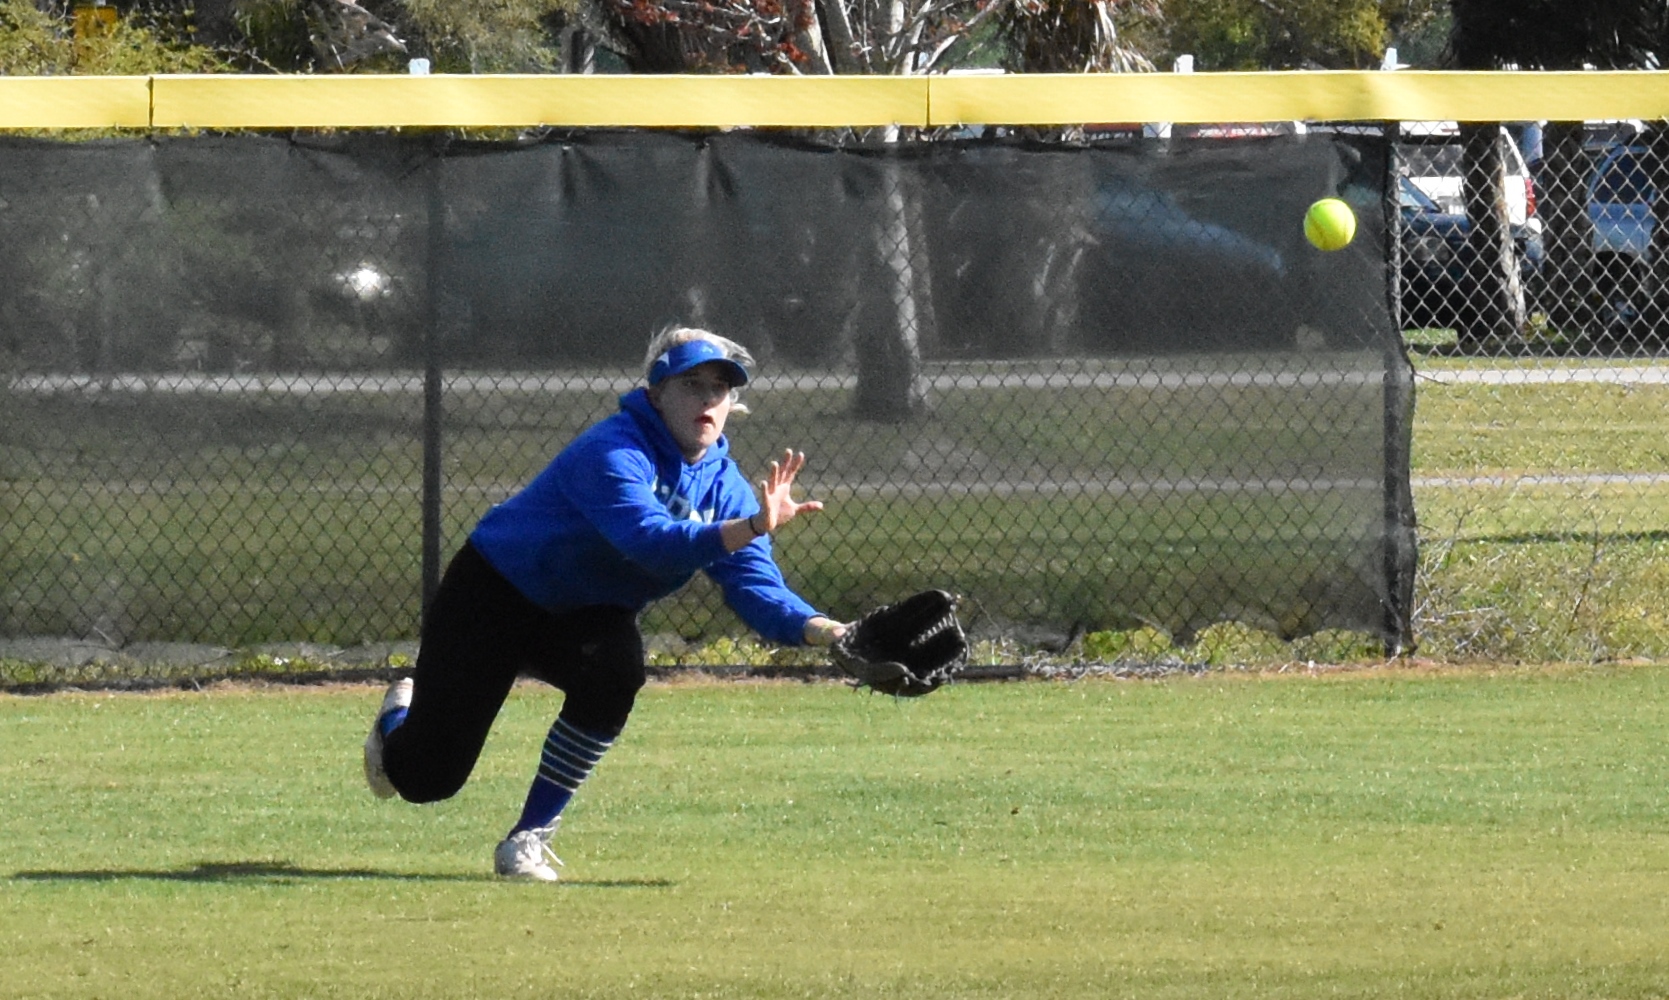 Lexi Chaillier diving for a catch in the outfield